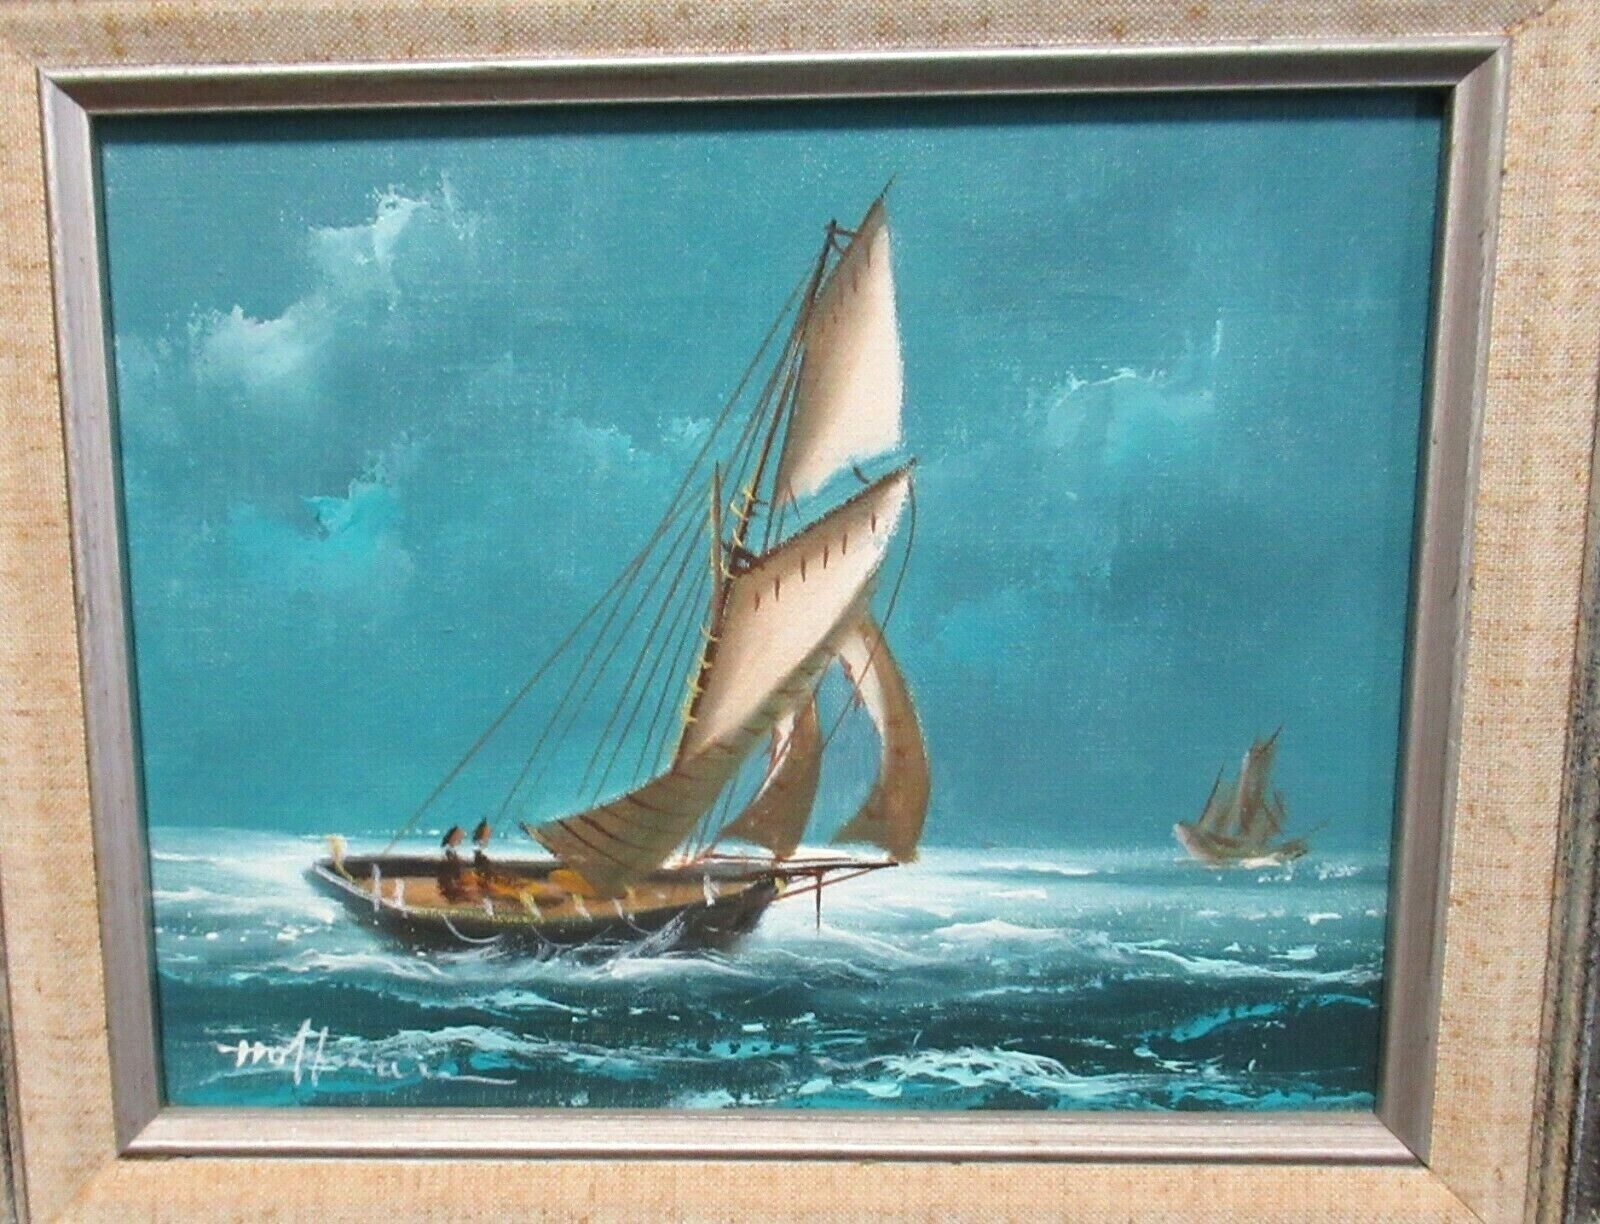 HOFFMAN FISHING SAIL BOAT ORIGINAL OIL ON CANVAS SEASCAPE PAINTING 